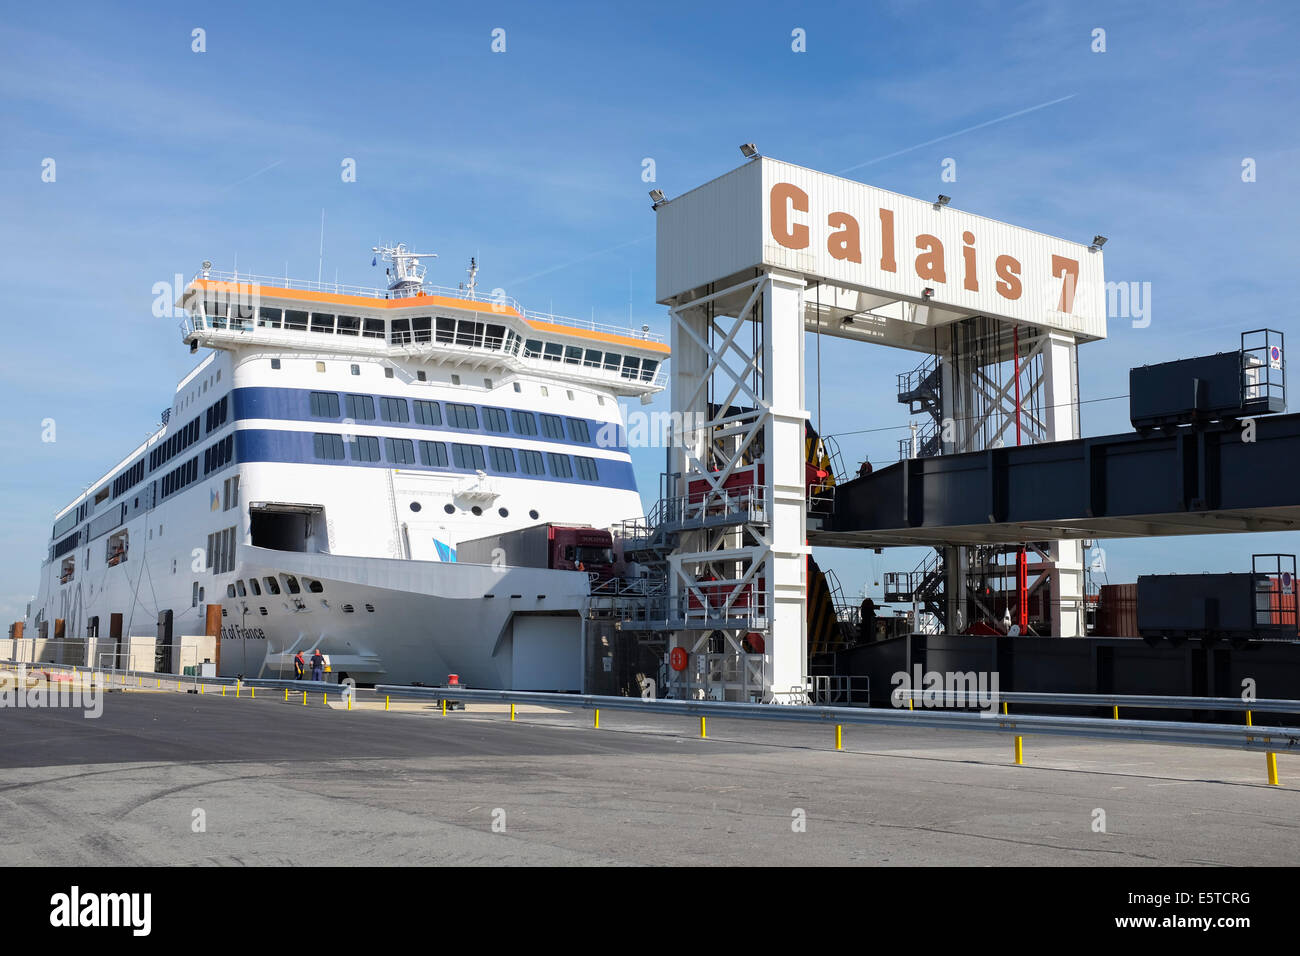 P&O Company ferry arriving at gate 7 of the Port of Calais, France Stock Photo